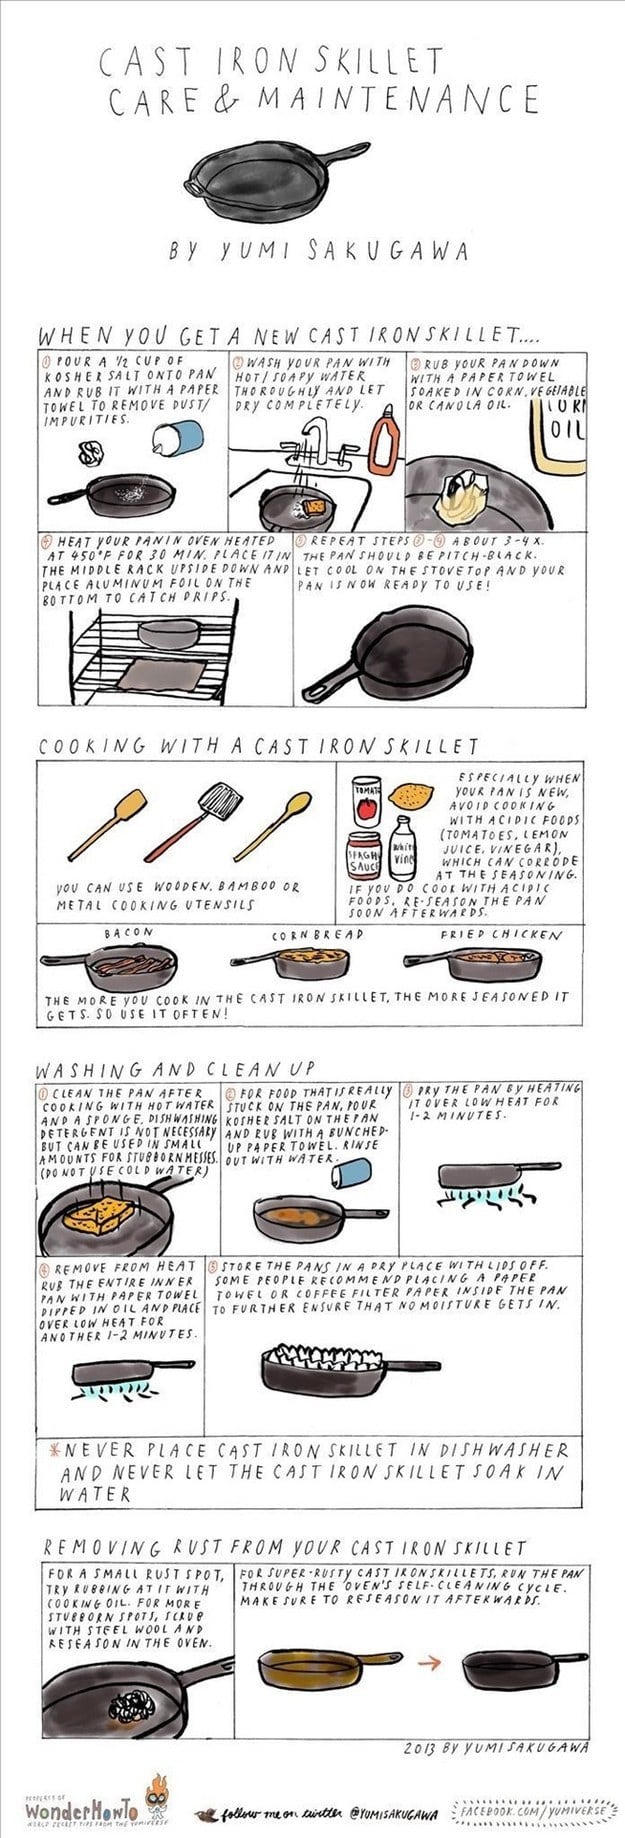 for cooking with and maintaining a cast iron skillet.